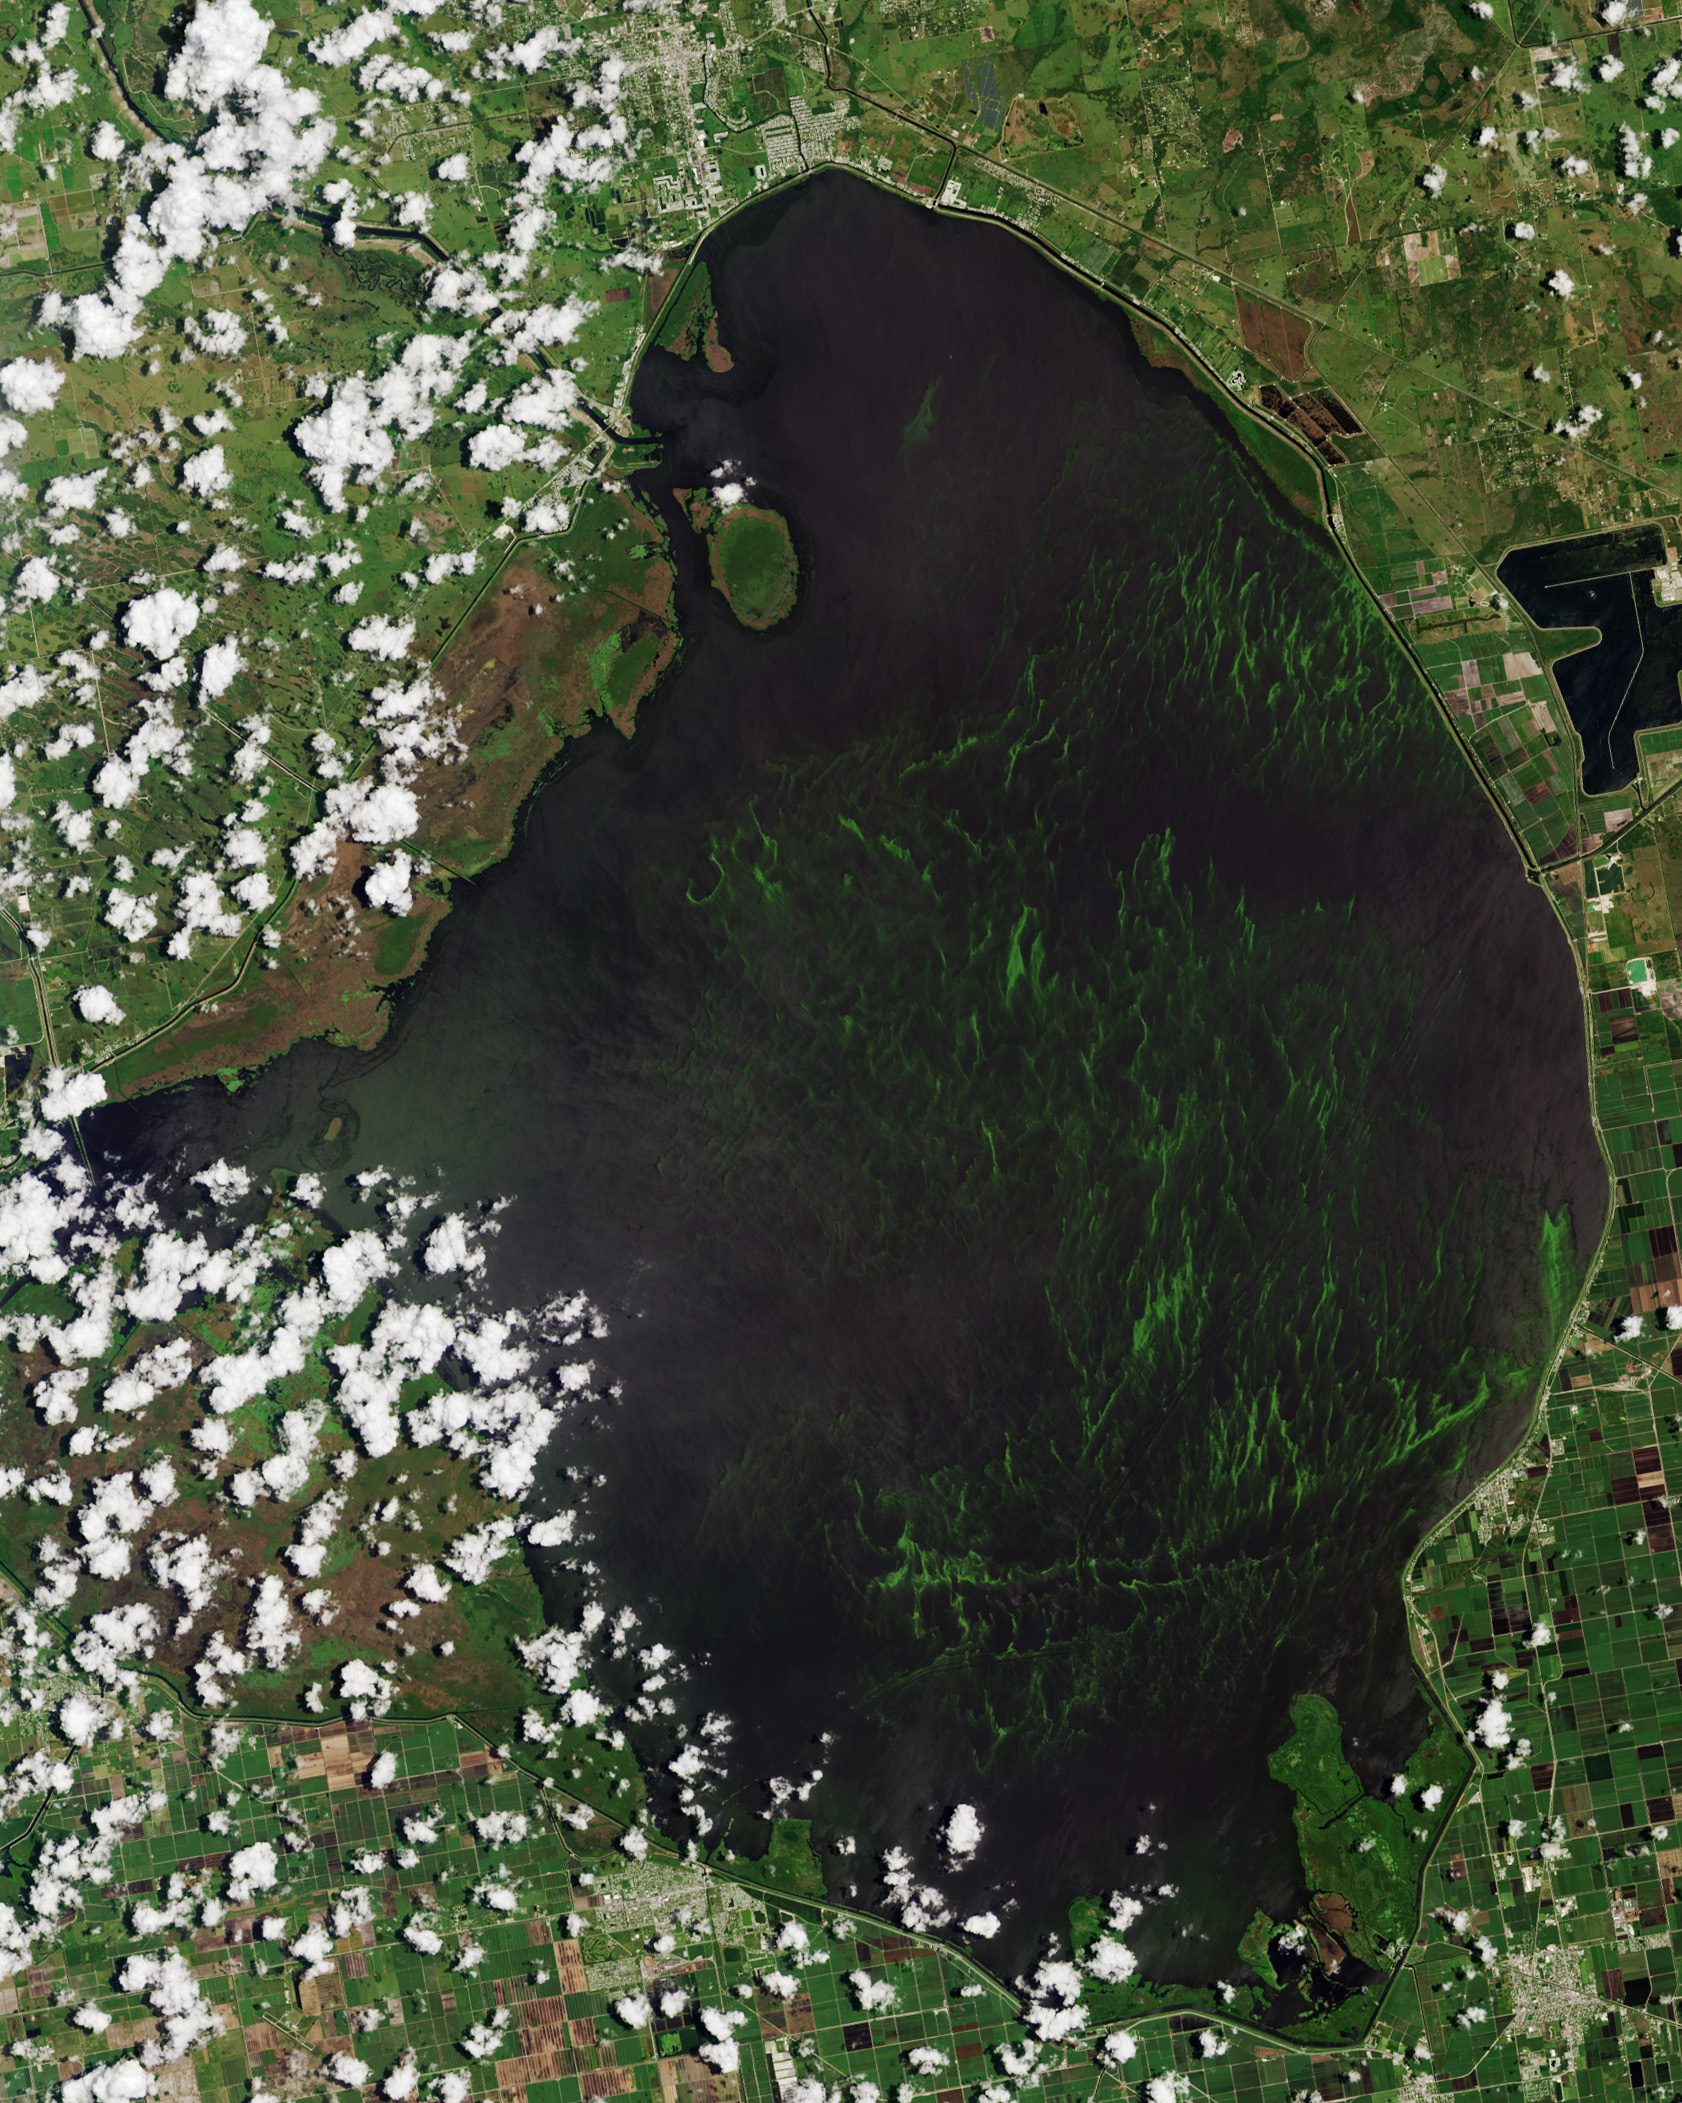 Toxic algal bloom covering Florida lake so big it is visible from spaceAtoxic bloom of blue-green algae is blossoming across Lake Okeechobee in ...